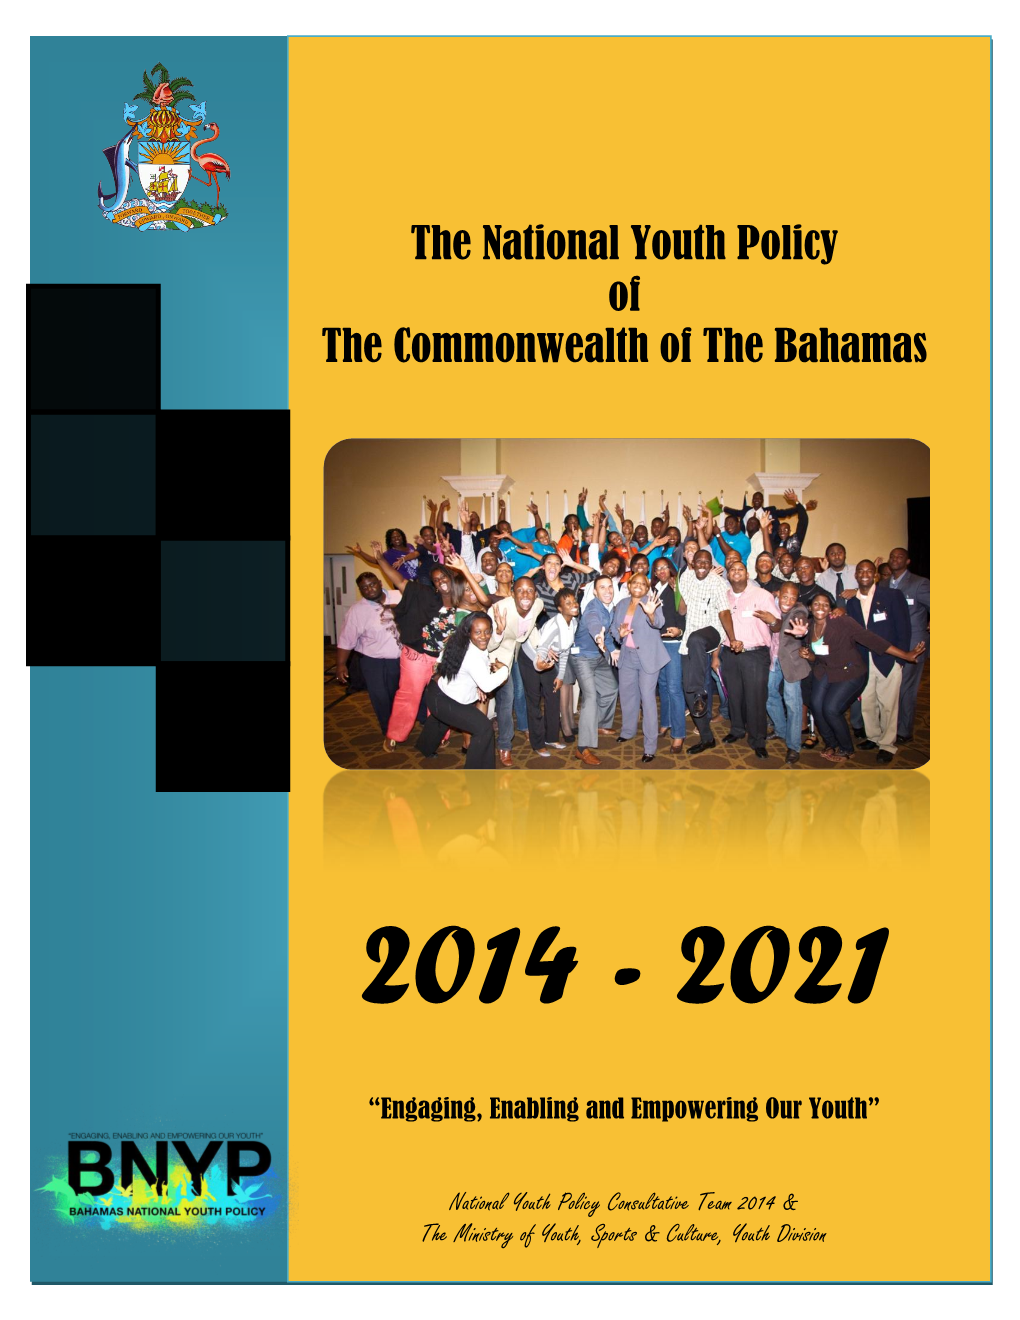 The National Youth Policy of the Commonwealth of the Bahamas